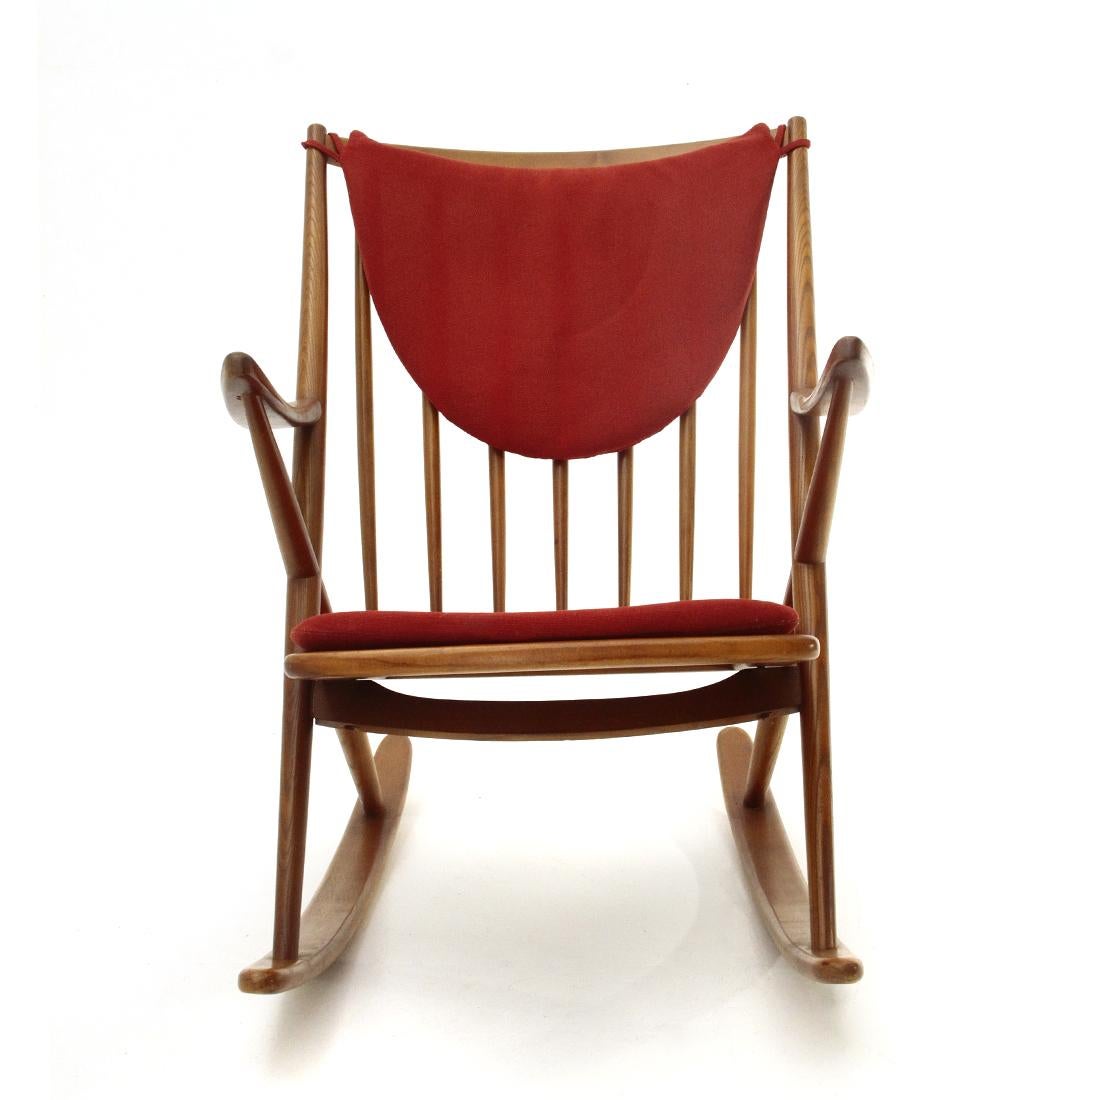 Rocking chair of Danish manufacture produced in the 1960s by Bramin to a design by Frank Reenskaug.
Solid wood structure.
Padded and lined cushions in red fabric on the seat and back.
Good general conditions, some signs due to normal use over